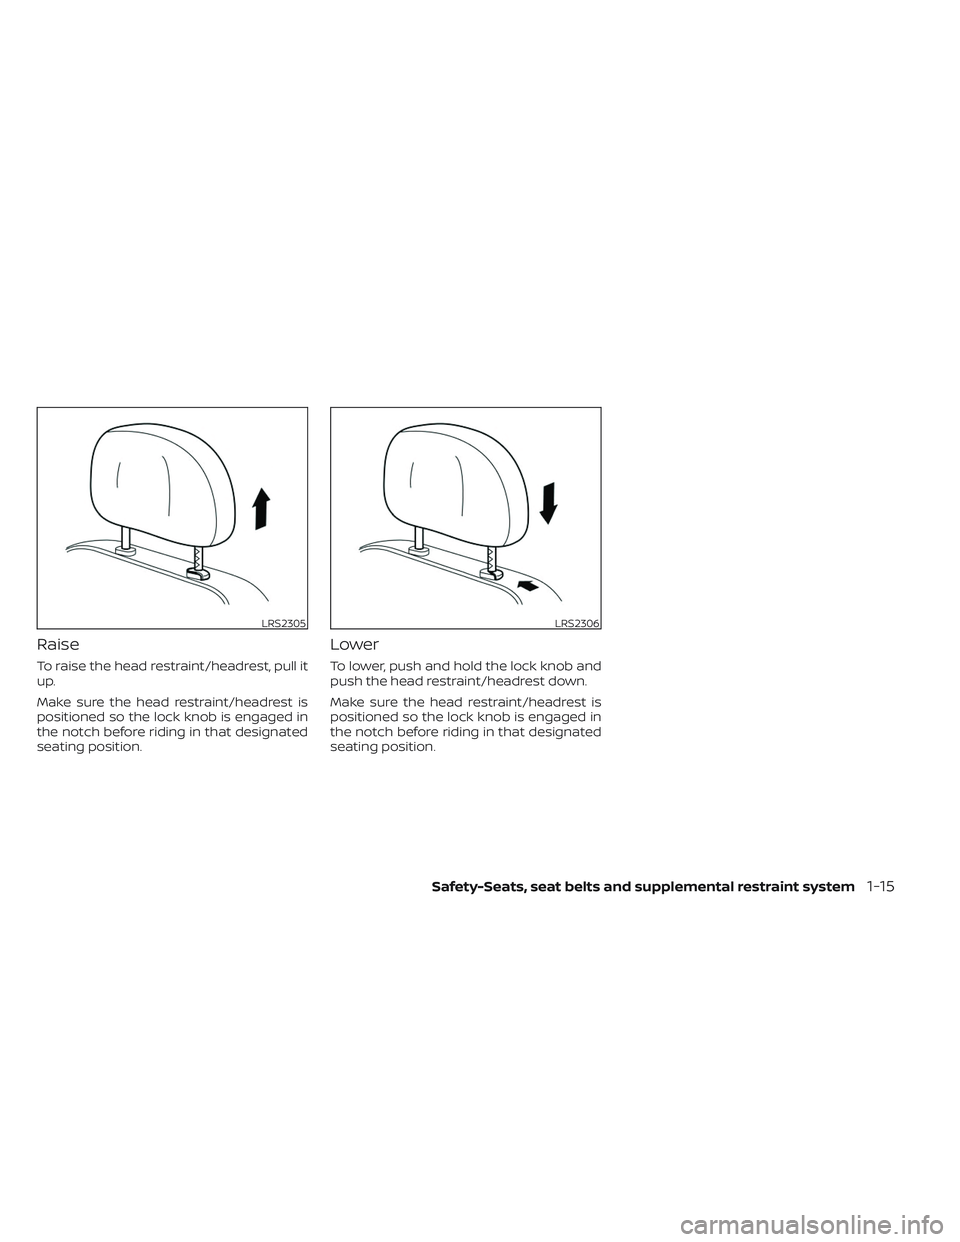 NISSAN TITAN 2022  Owners Manual Raise
To raise the head restraint/headrest, pull it
up.
Make sure the head restraint/headrest is
positioned so the lock knob is engaged in
the notch before riding in that designated
seating position.
